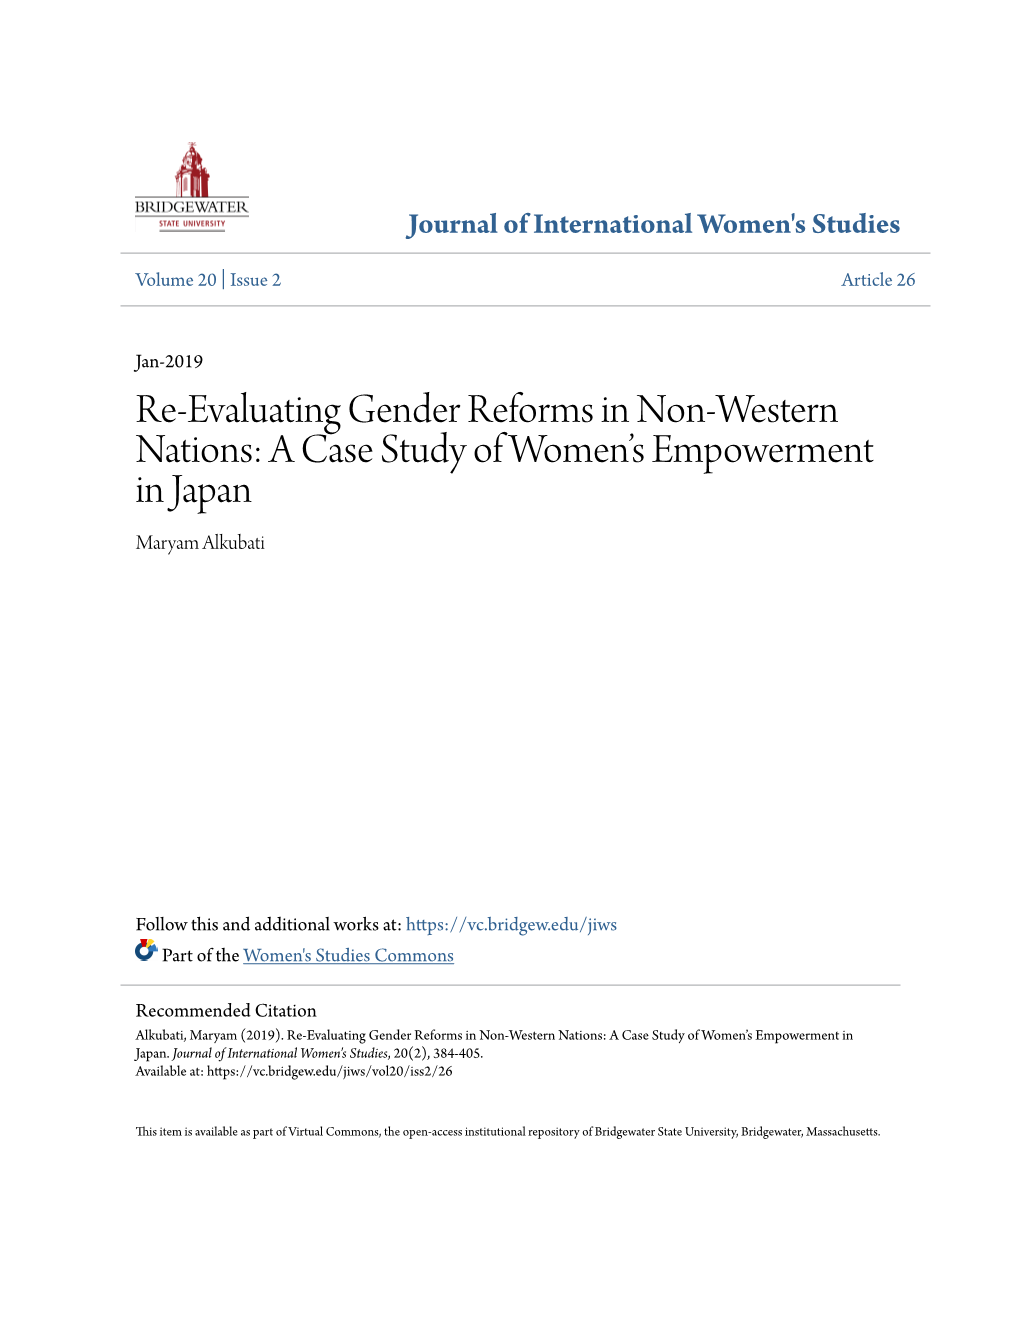 Re-Evaluating Gender Reforms in Non-Western Nations: a Case Study of Women’S Empowerment in Japan Maryam Alkubati